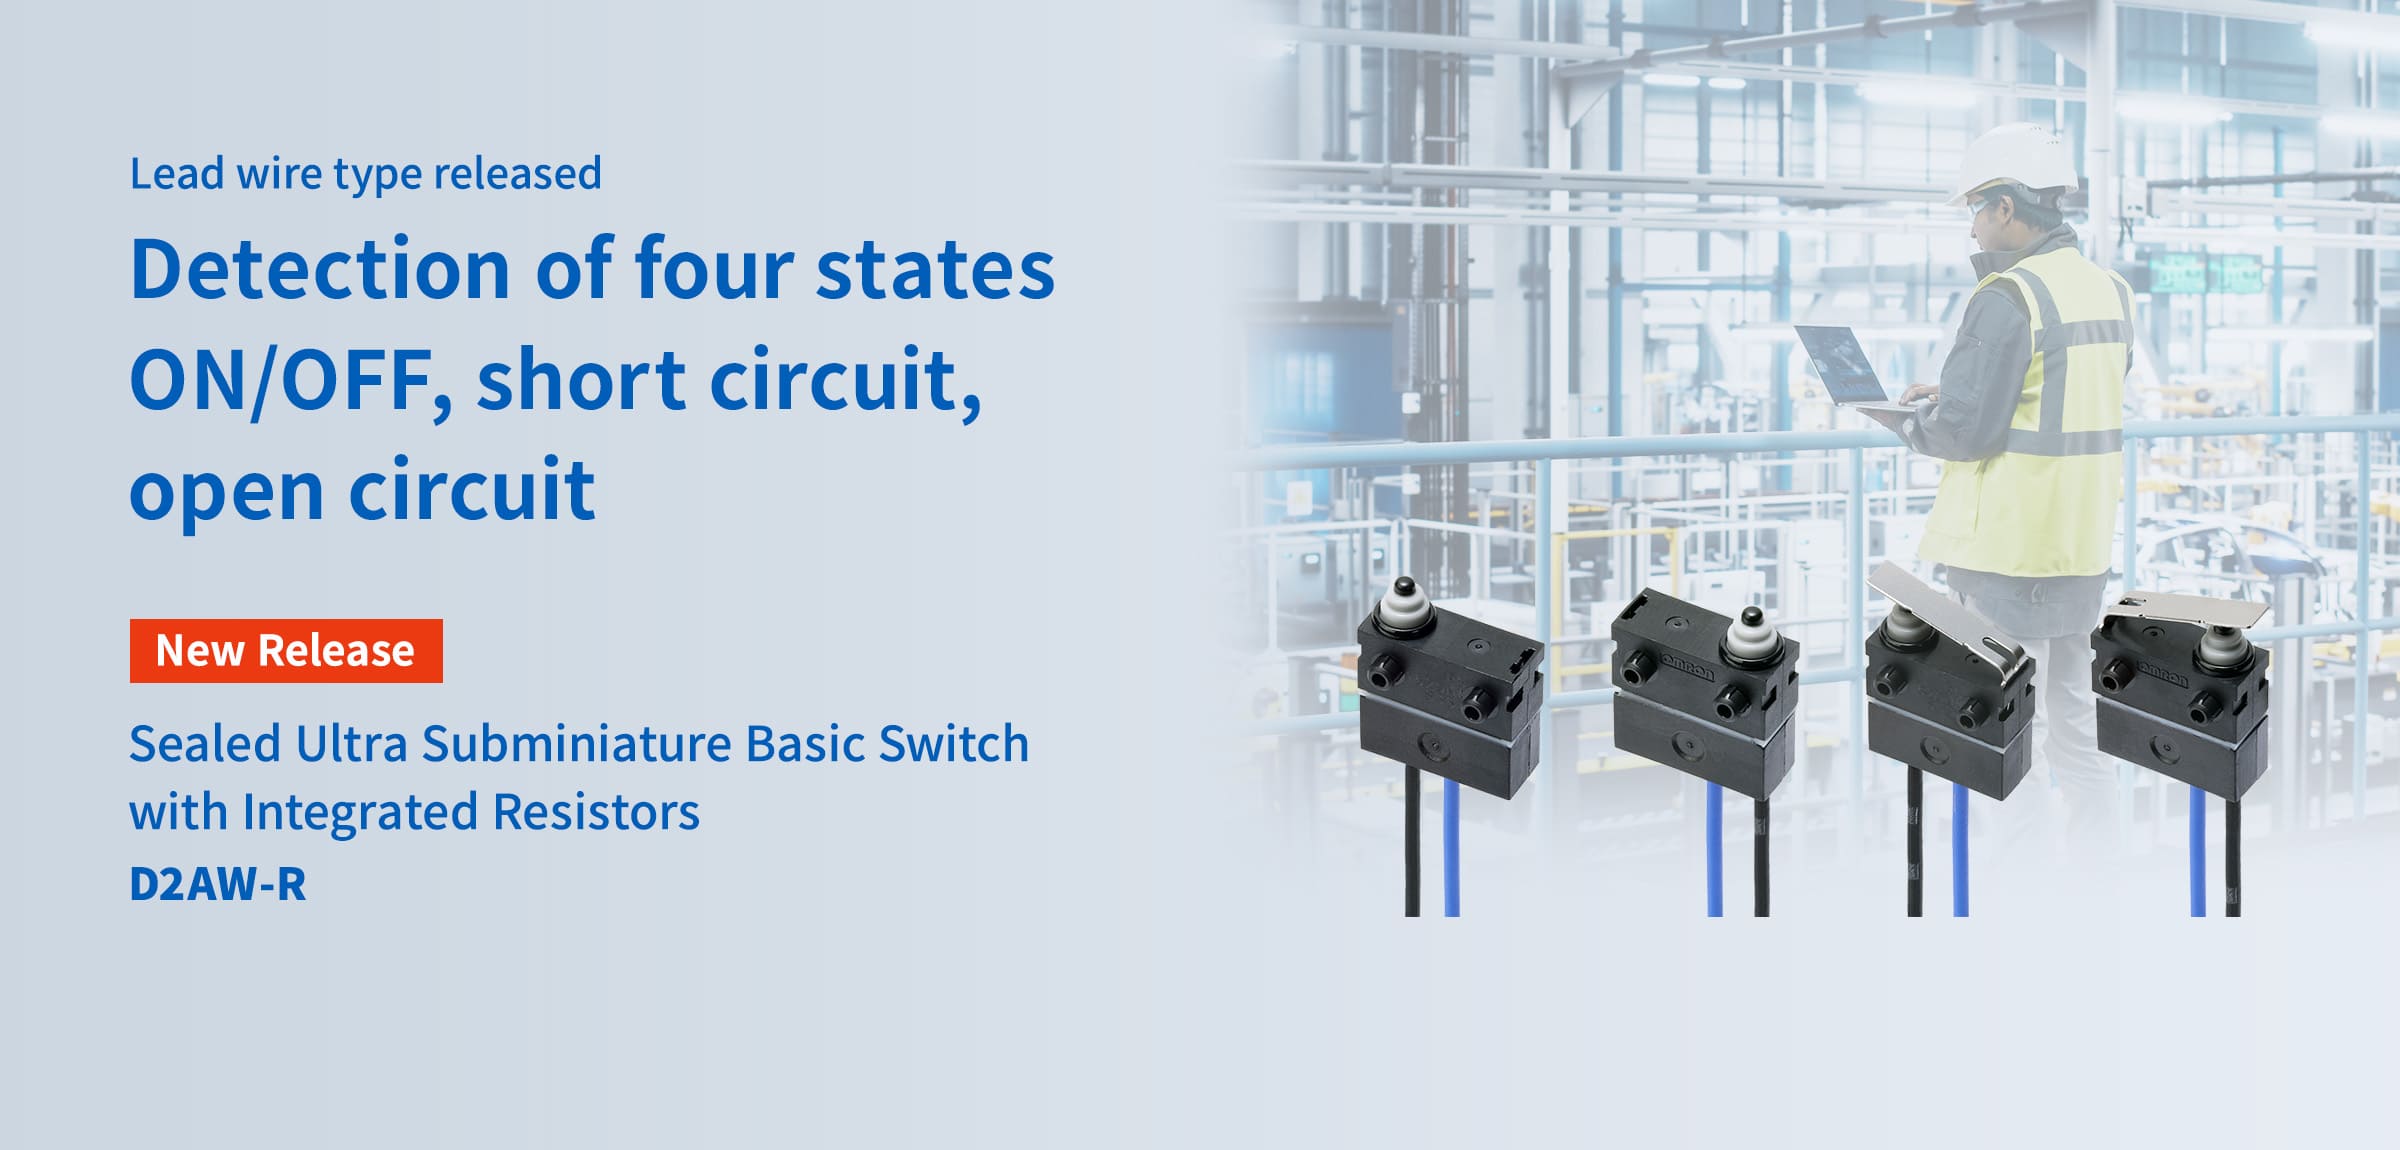 Lead wire type released. Detection of four states ON/OFF, short circuit, open circuit New Release Sealed Ultra Subminiature Basic Switch with Integrated Resistors D2AW-R